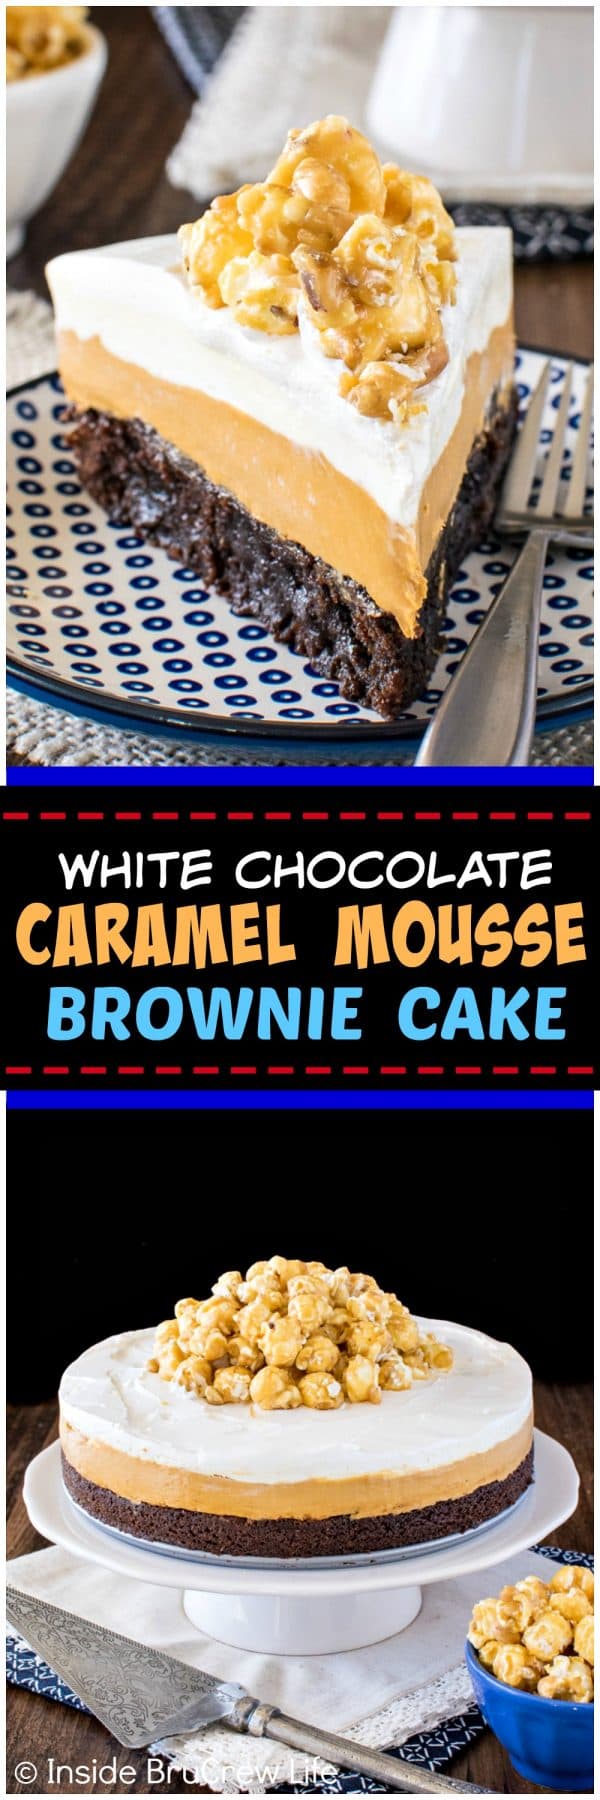 White Chocolate Caramel Mousse Brownie Cake - layers of fudgy brownie & no bake cheesecake mousse make this a must make dessert. Great recipe for parties!